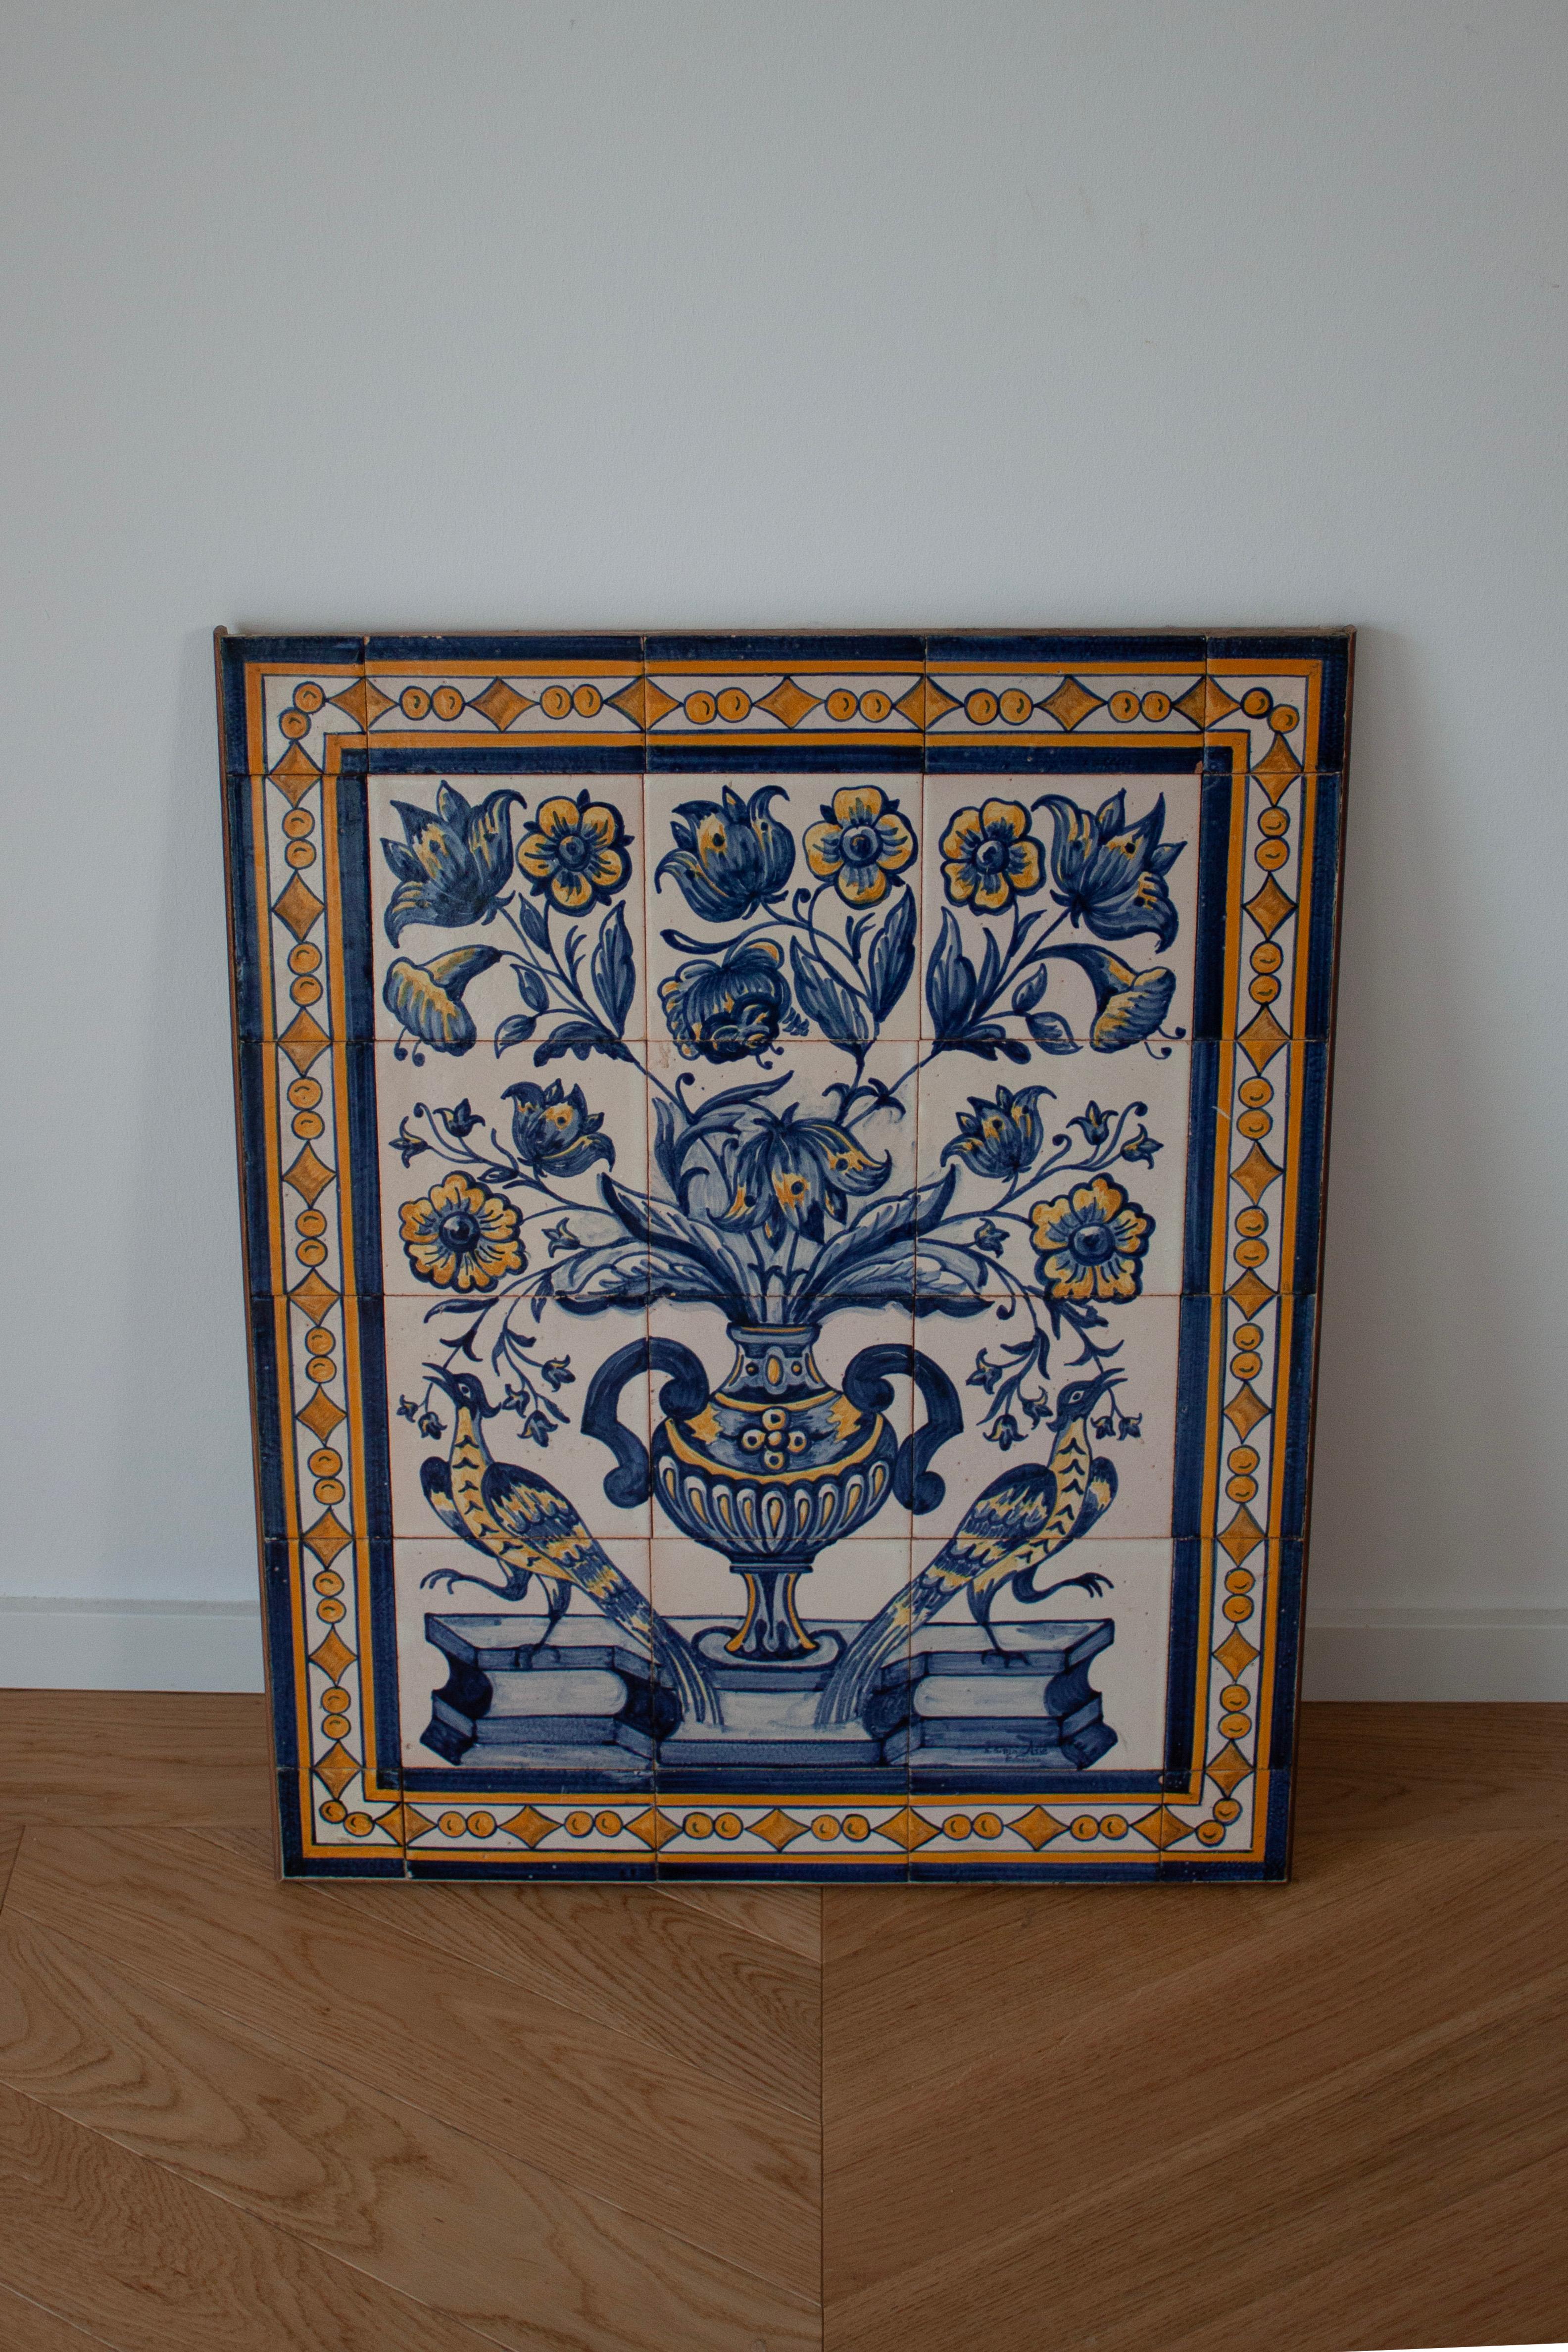 European Floral and Animal Blue and White Tiled Wall Artwork Wall Hanging  In Good Condition For Sale In Rümmingen, BW